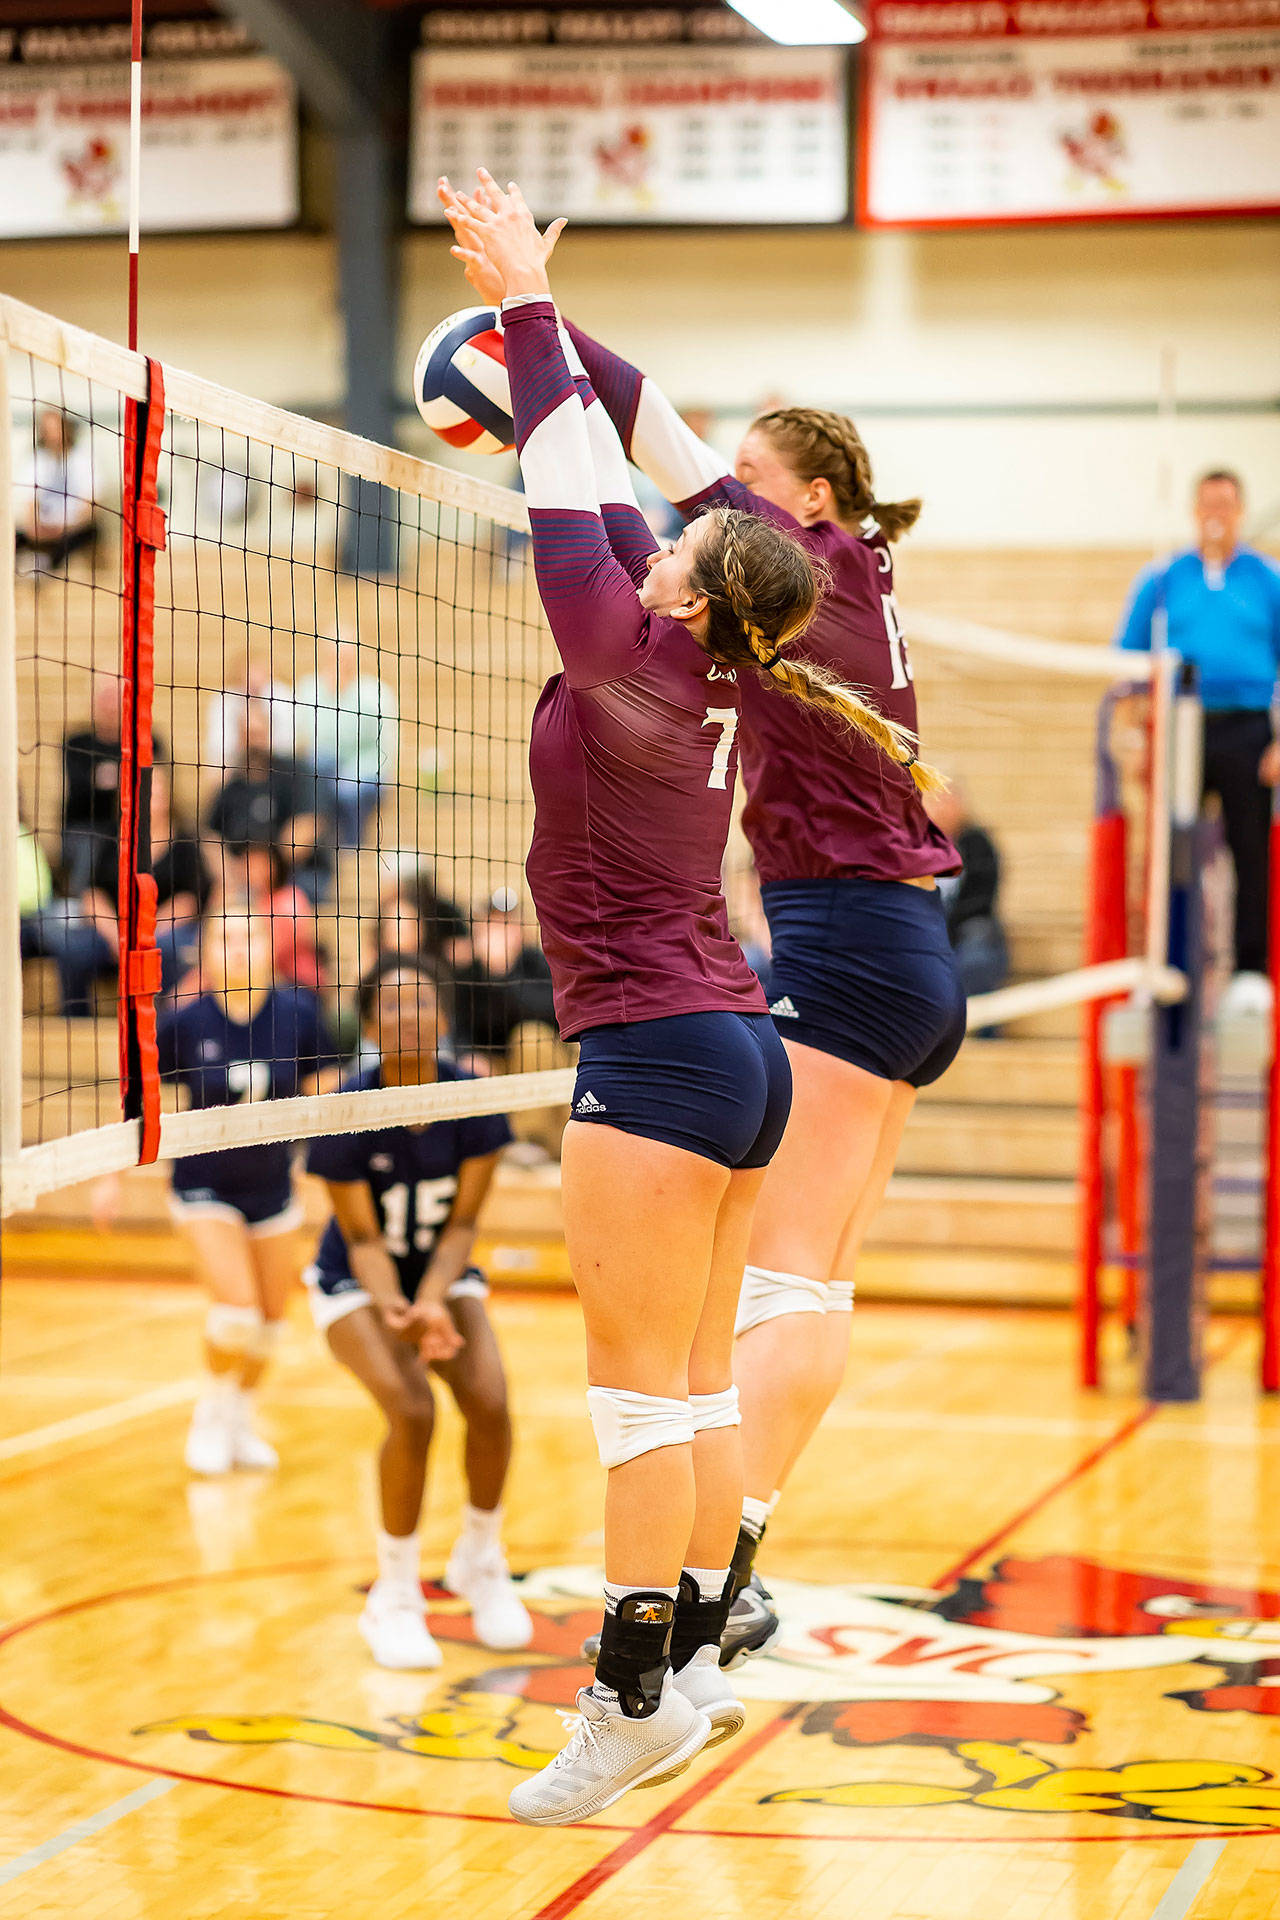 Samantha Hines, front, and Hailee Blau team-up for a block in Whatcom’s match Wednesday. (Photo by John Fisken)